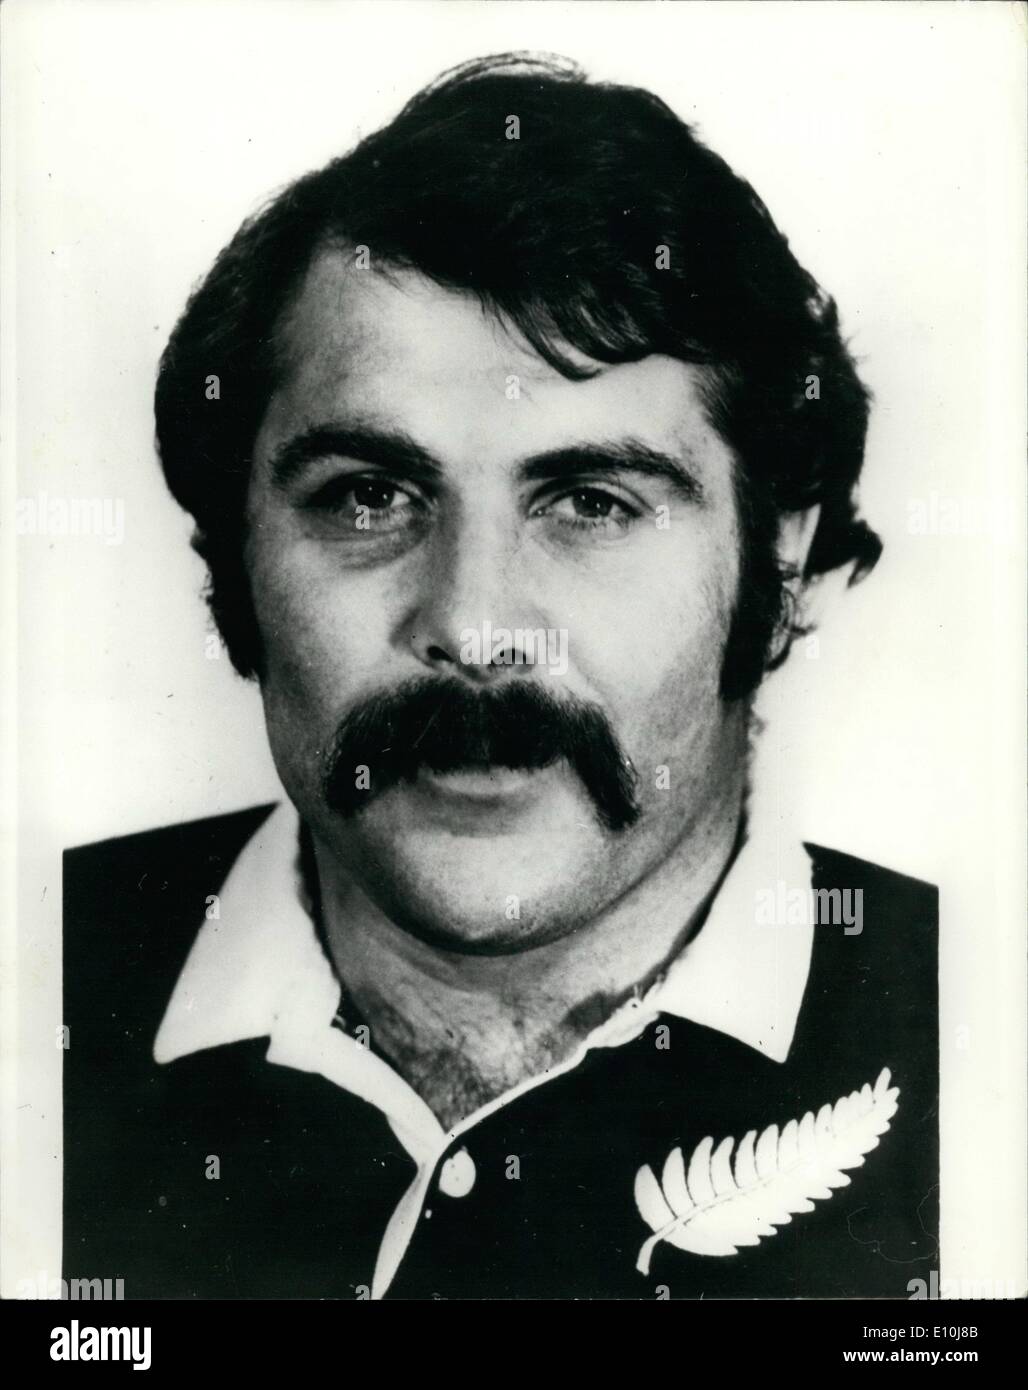 Dec. 12, 1972 - All Black Player Keith Murdoch Sent Home.: The All Blacks 17- stone prop forward Keith Murdoch, is being sent home to New Zealand. This is the answer of the New Zealand management to Murdoch's behaviour on Saturday night when he was involved in a fight with a security guard at the team's hotel in Cardiff following the victory over Wales.Photo shows Keith Murdoch- the All Blacks prop forward, who was been sent home to New Zealand Stock Photo